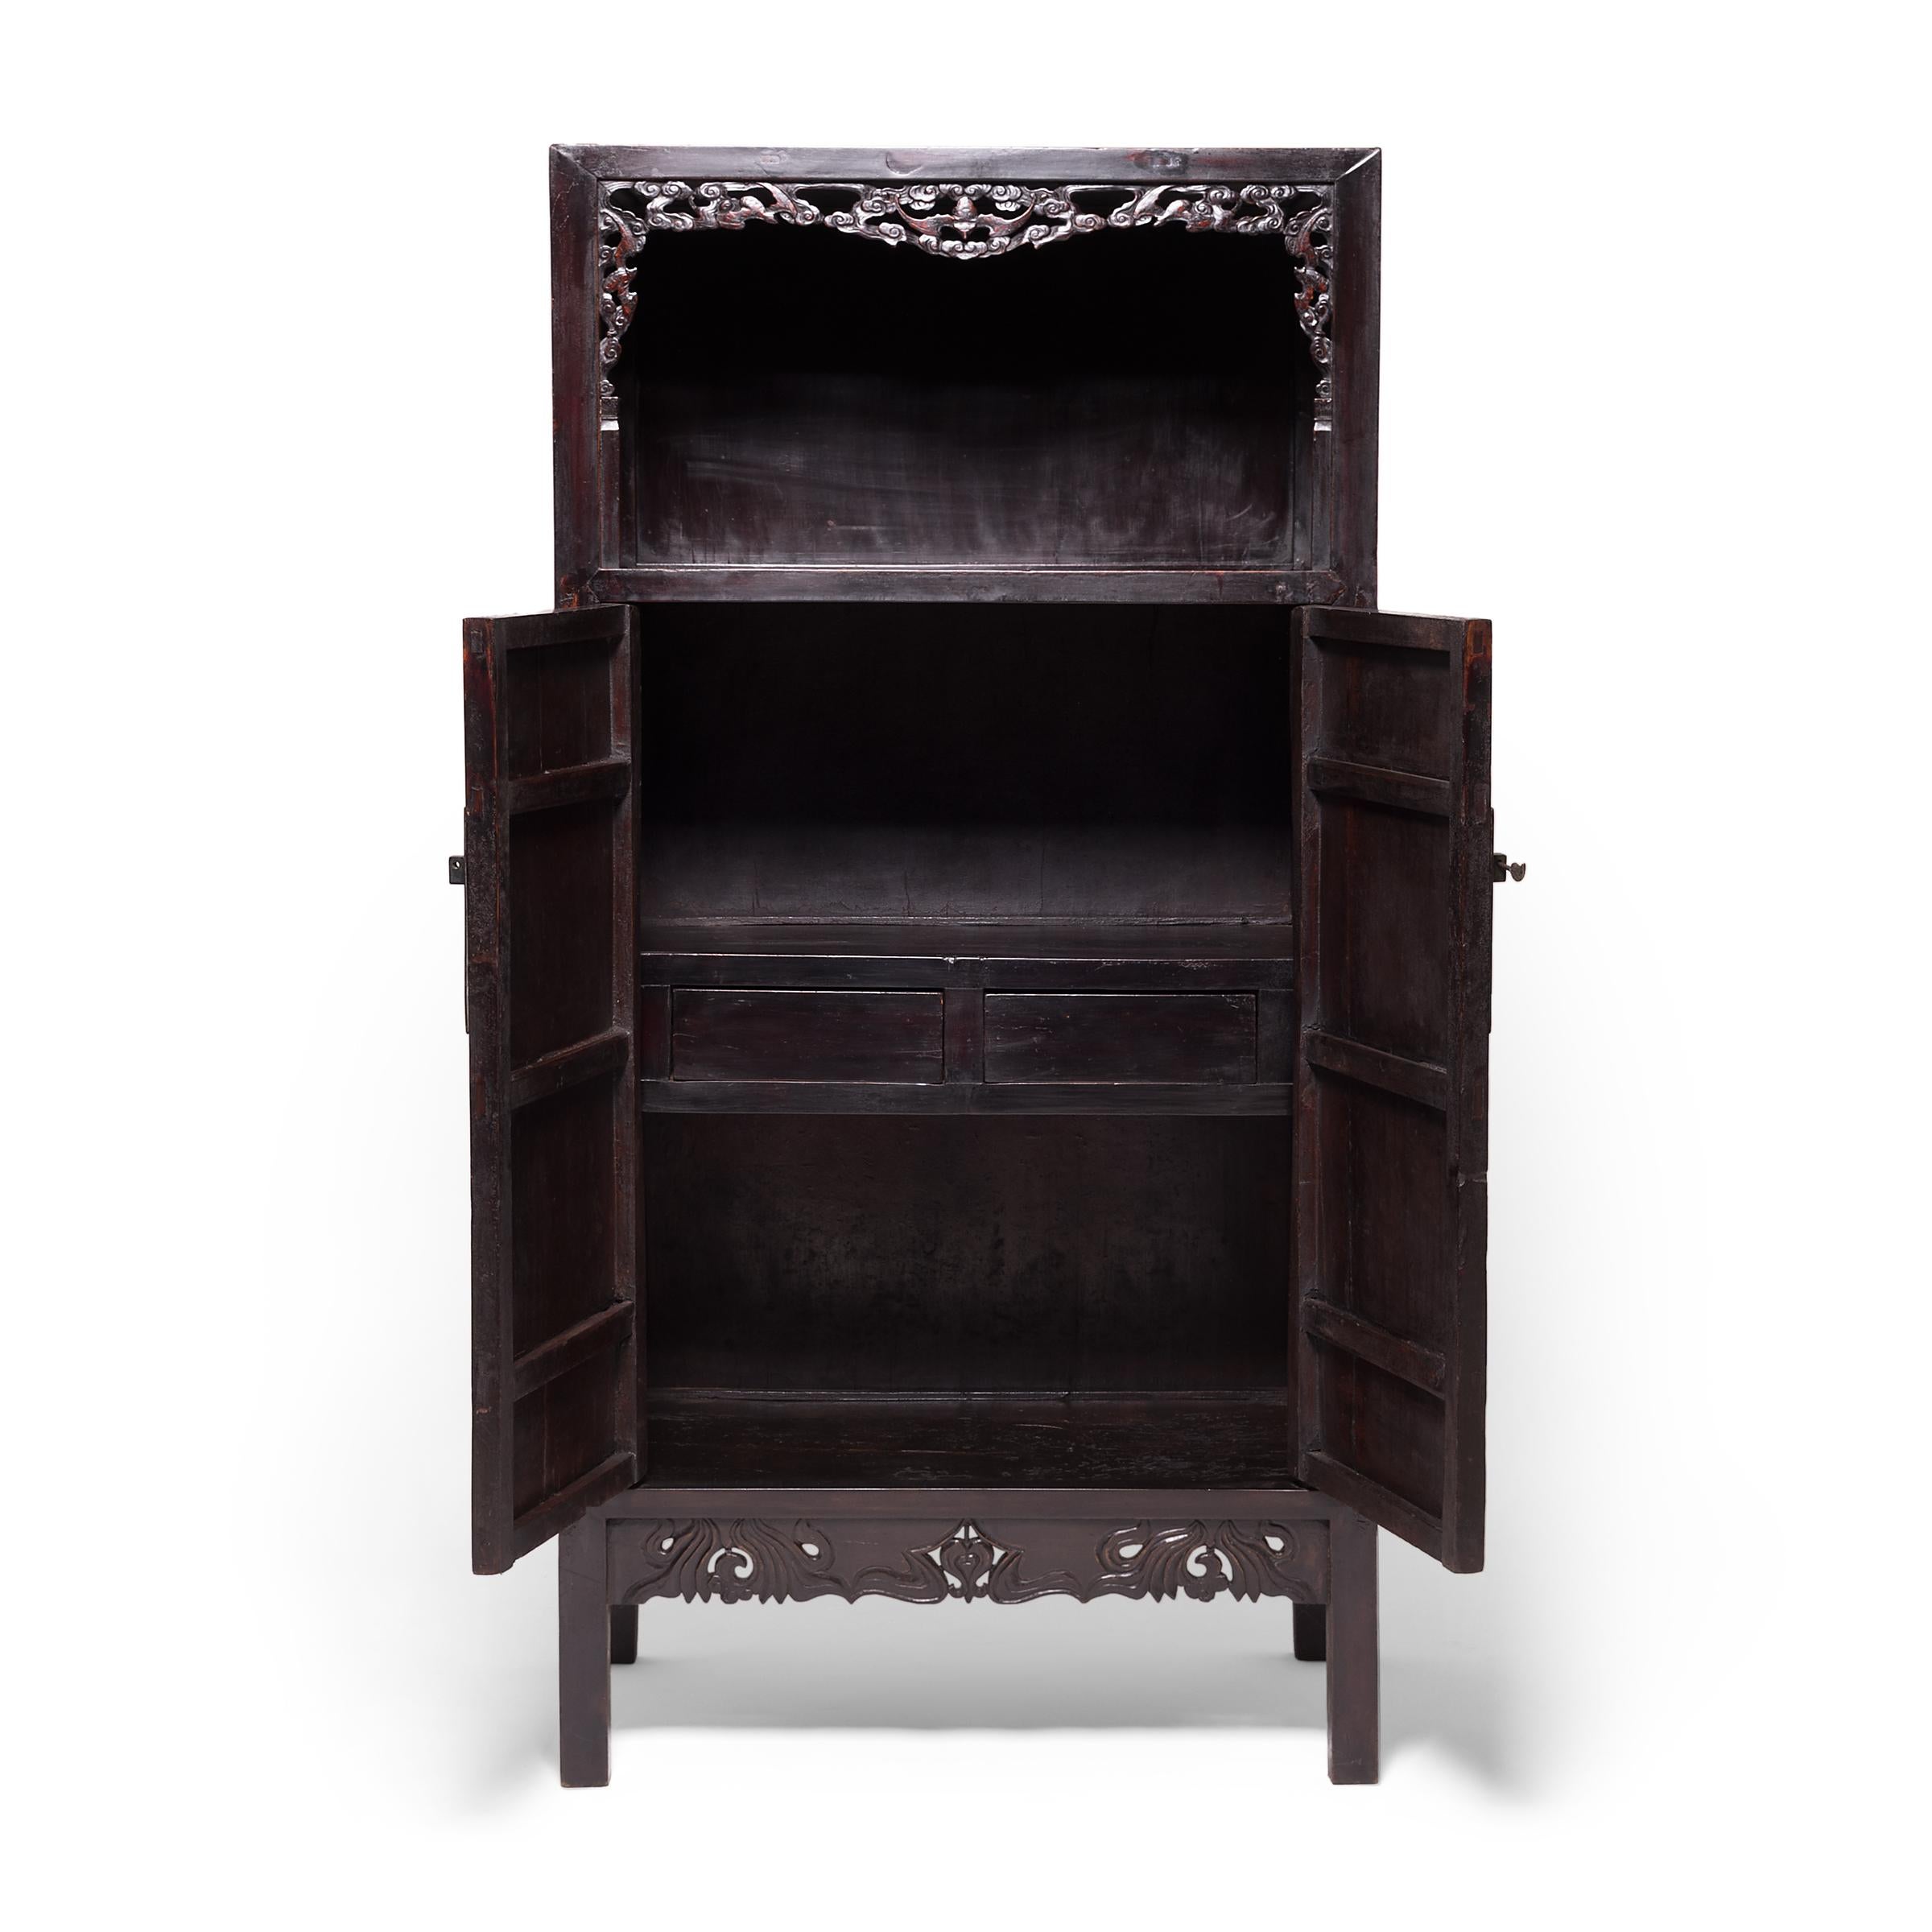 This book cabinet was likely originally commissioned for a scholar's study to store important texts. The quality and craftsmanship is clear in the bold lines, elegant hardware, and traditional mortise and tenon joinery. But, the exquisitely carved